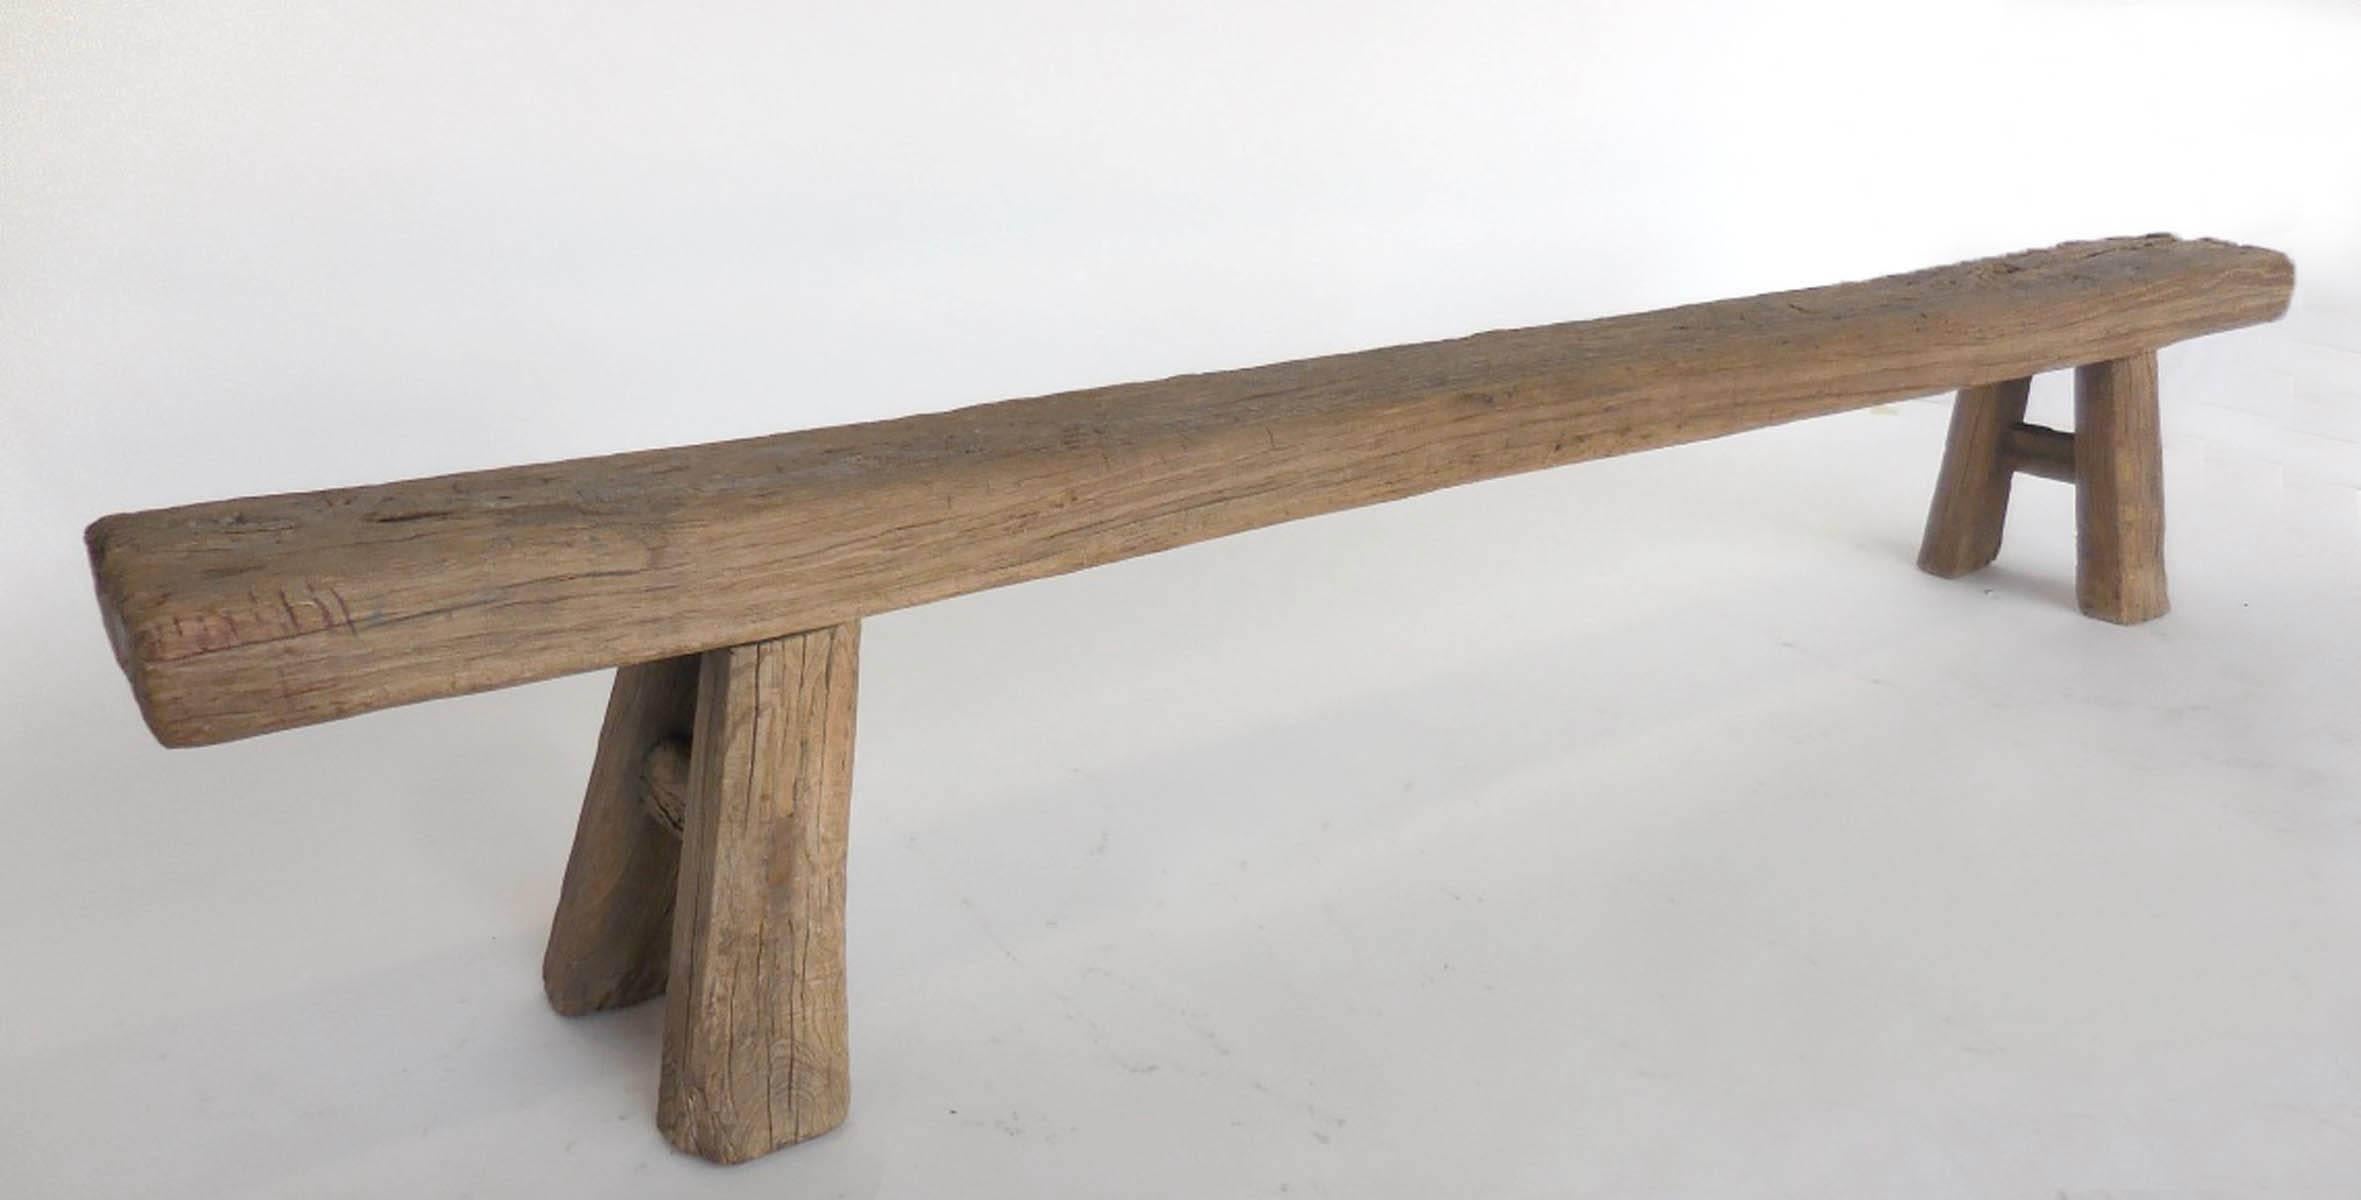 Long, narrow Japanese backless bench with flared legs. Measure: Seat is 8.5 wide, width of legs is 12. Great proportion to this piece. Wood is thick and grooved and worn to a smooth, natural patina. Legs were moved or changed at some point during